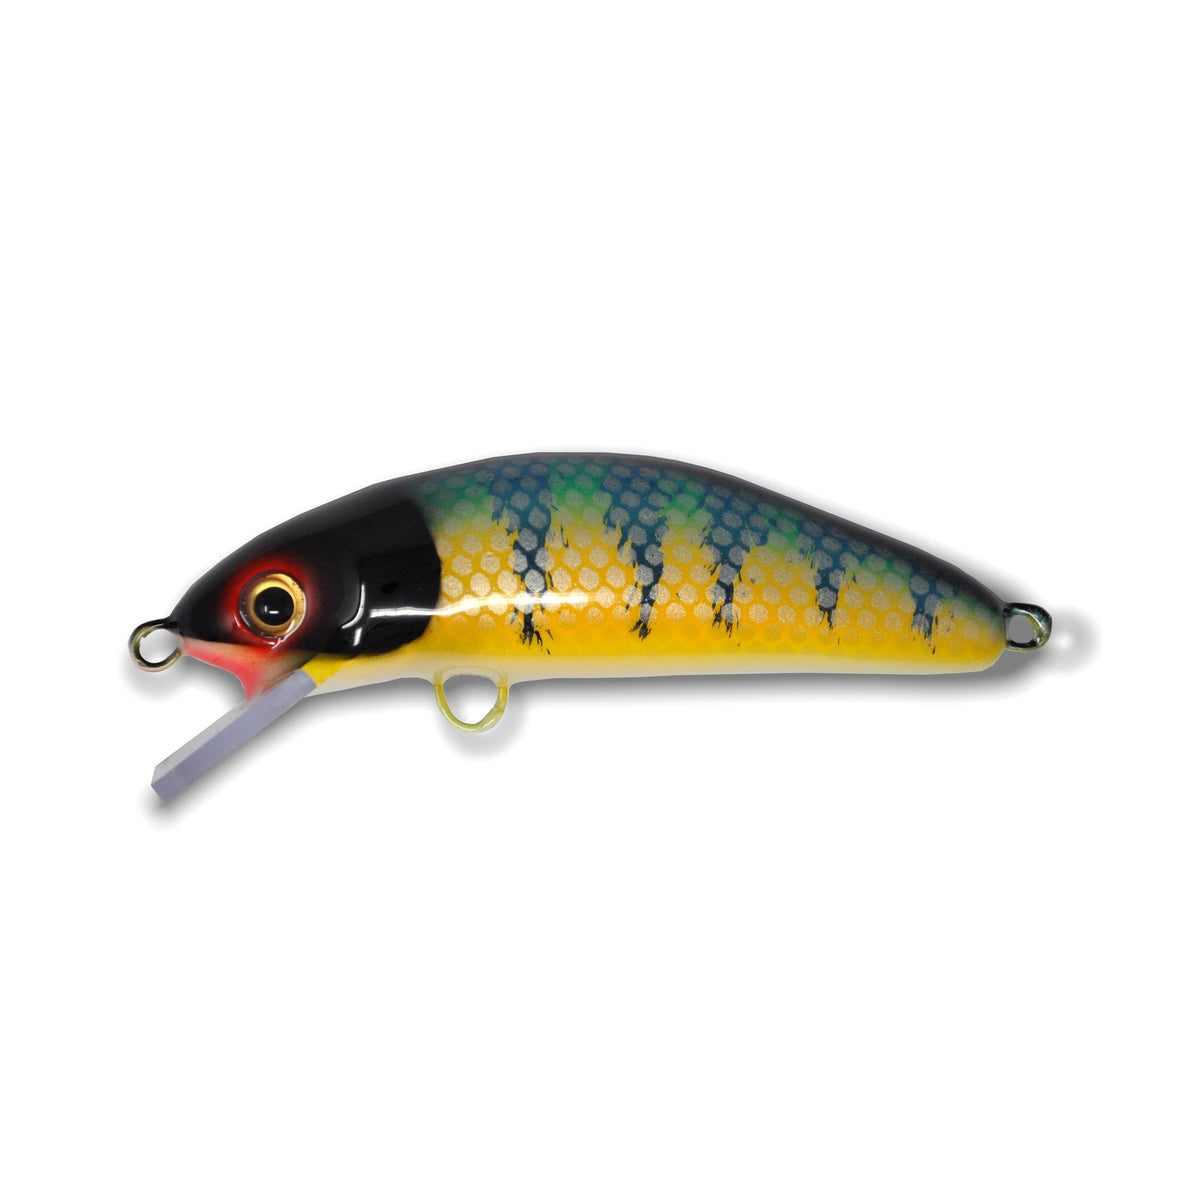 View of Crankbaits Blue Water Baits 6" Fat Chub Crankbait available at EZOKO Pike and Musky Shop